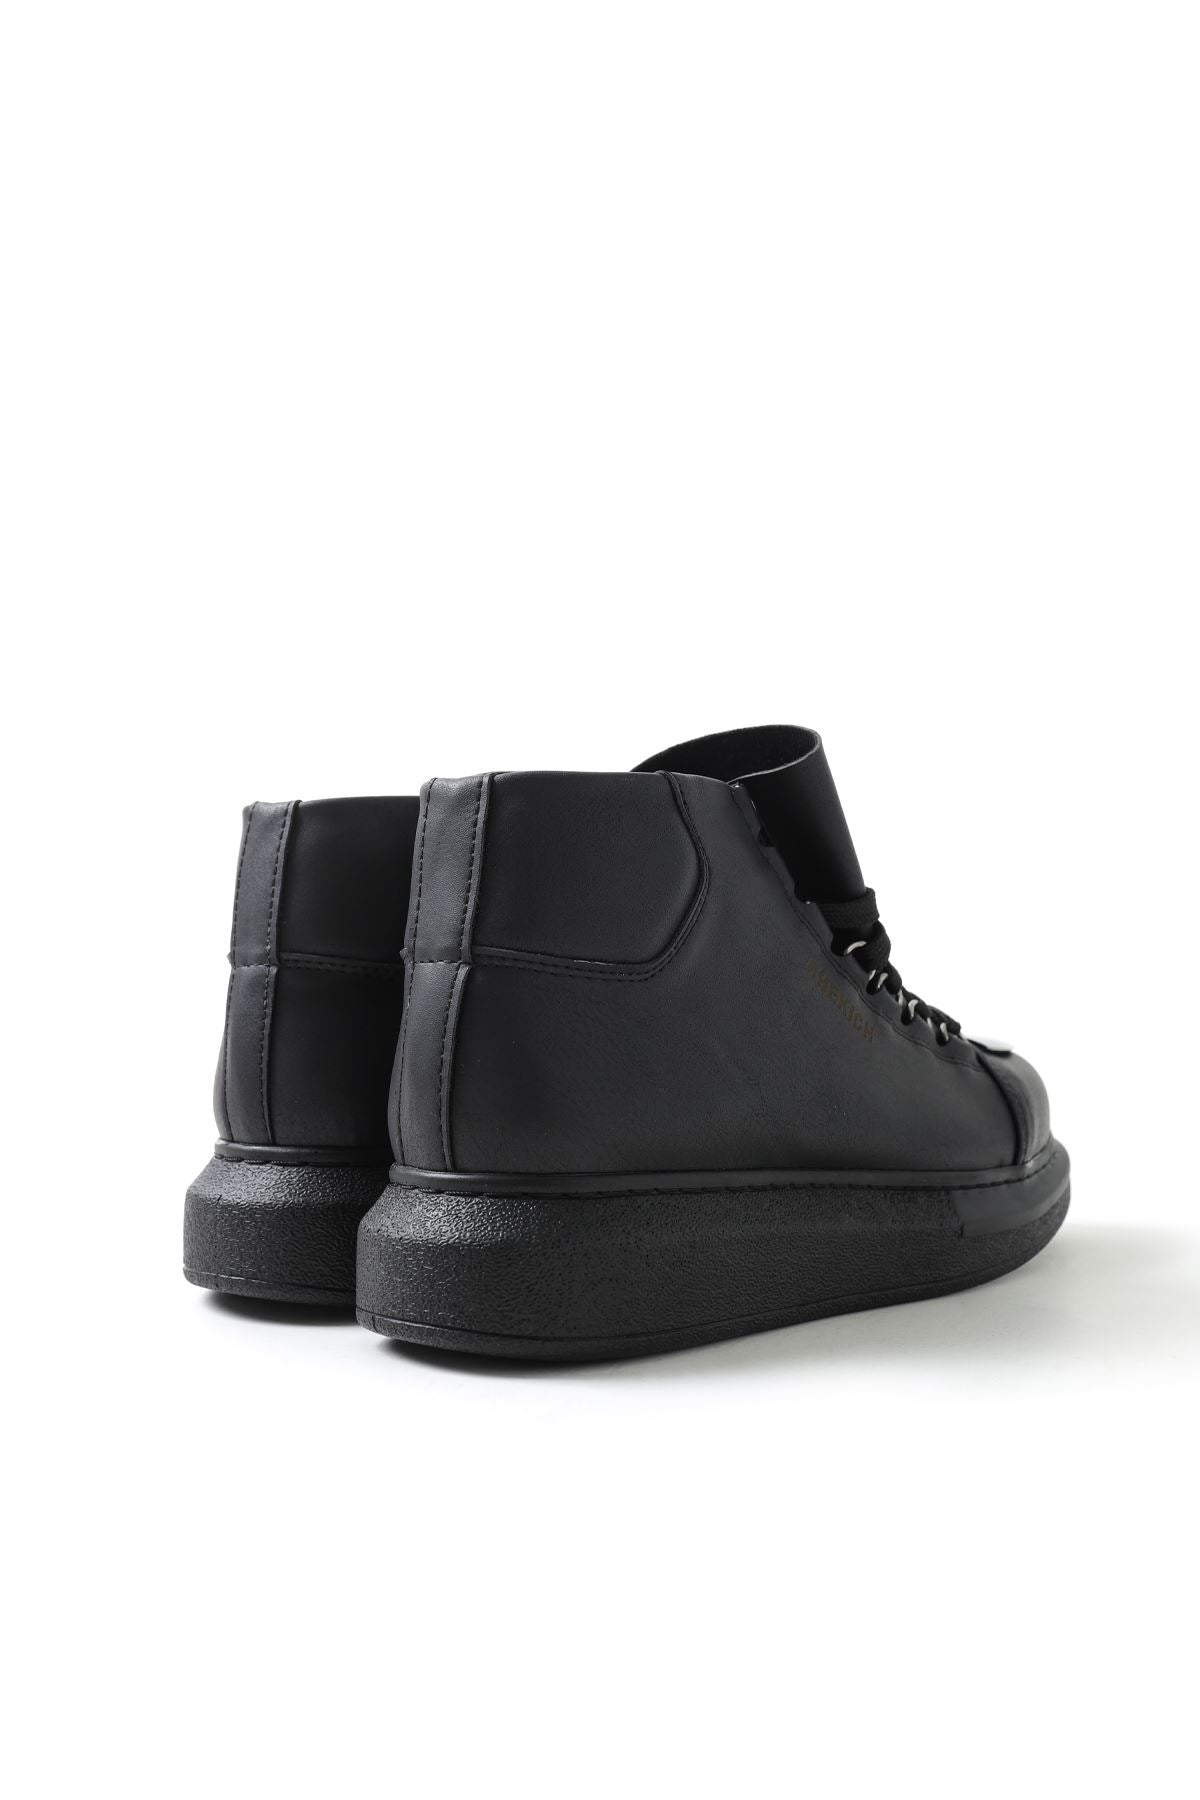 CH267 ST Women's Boots BLACK - STREETMODE ™